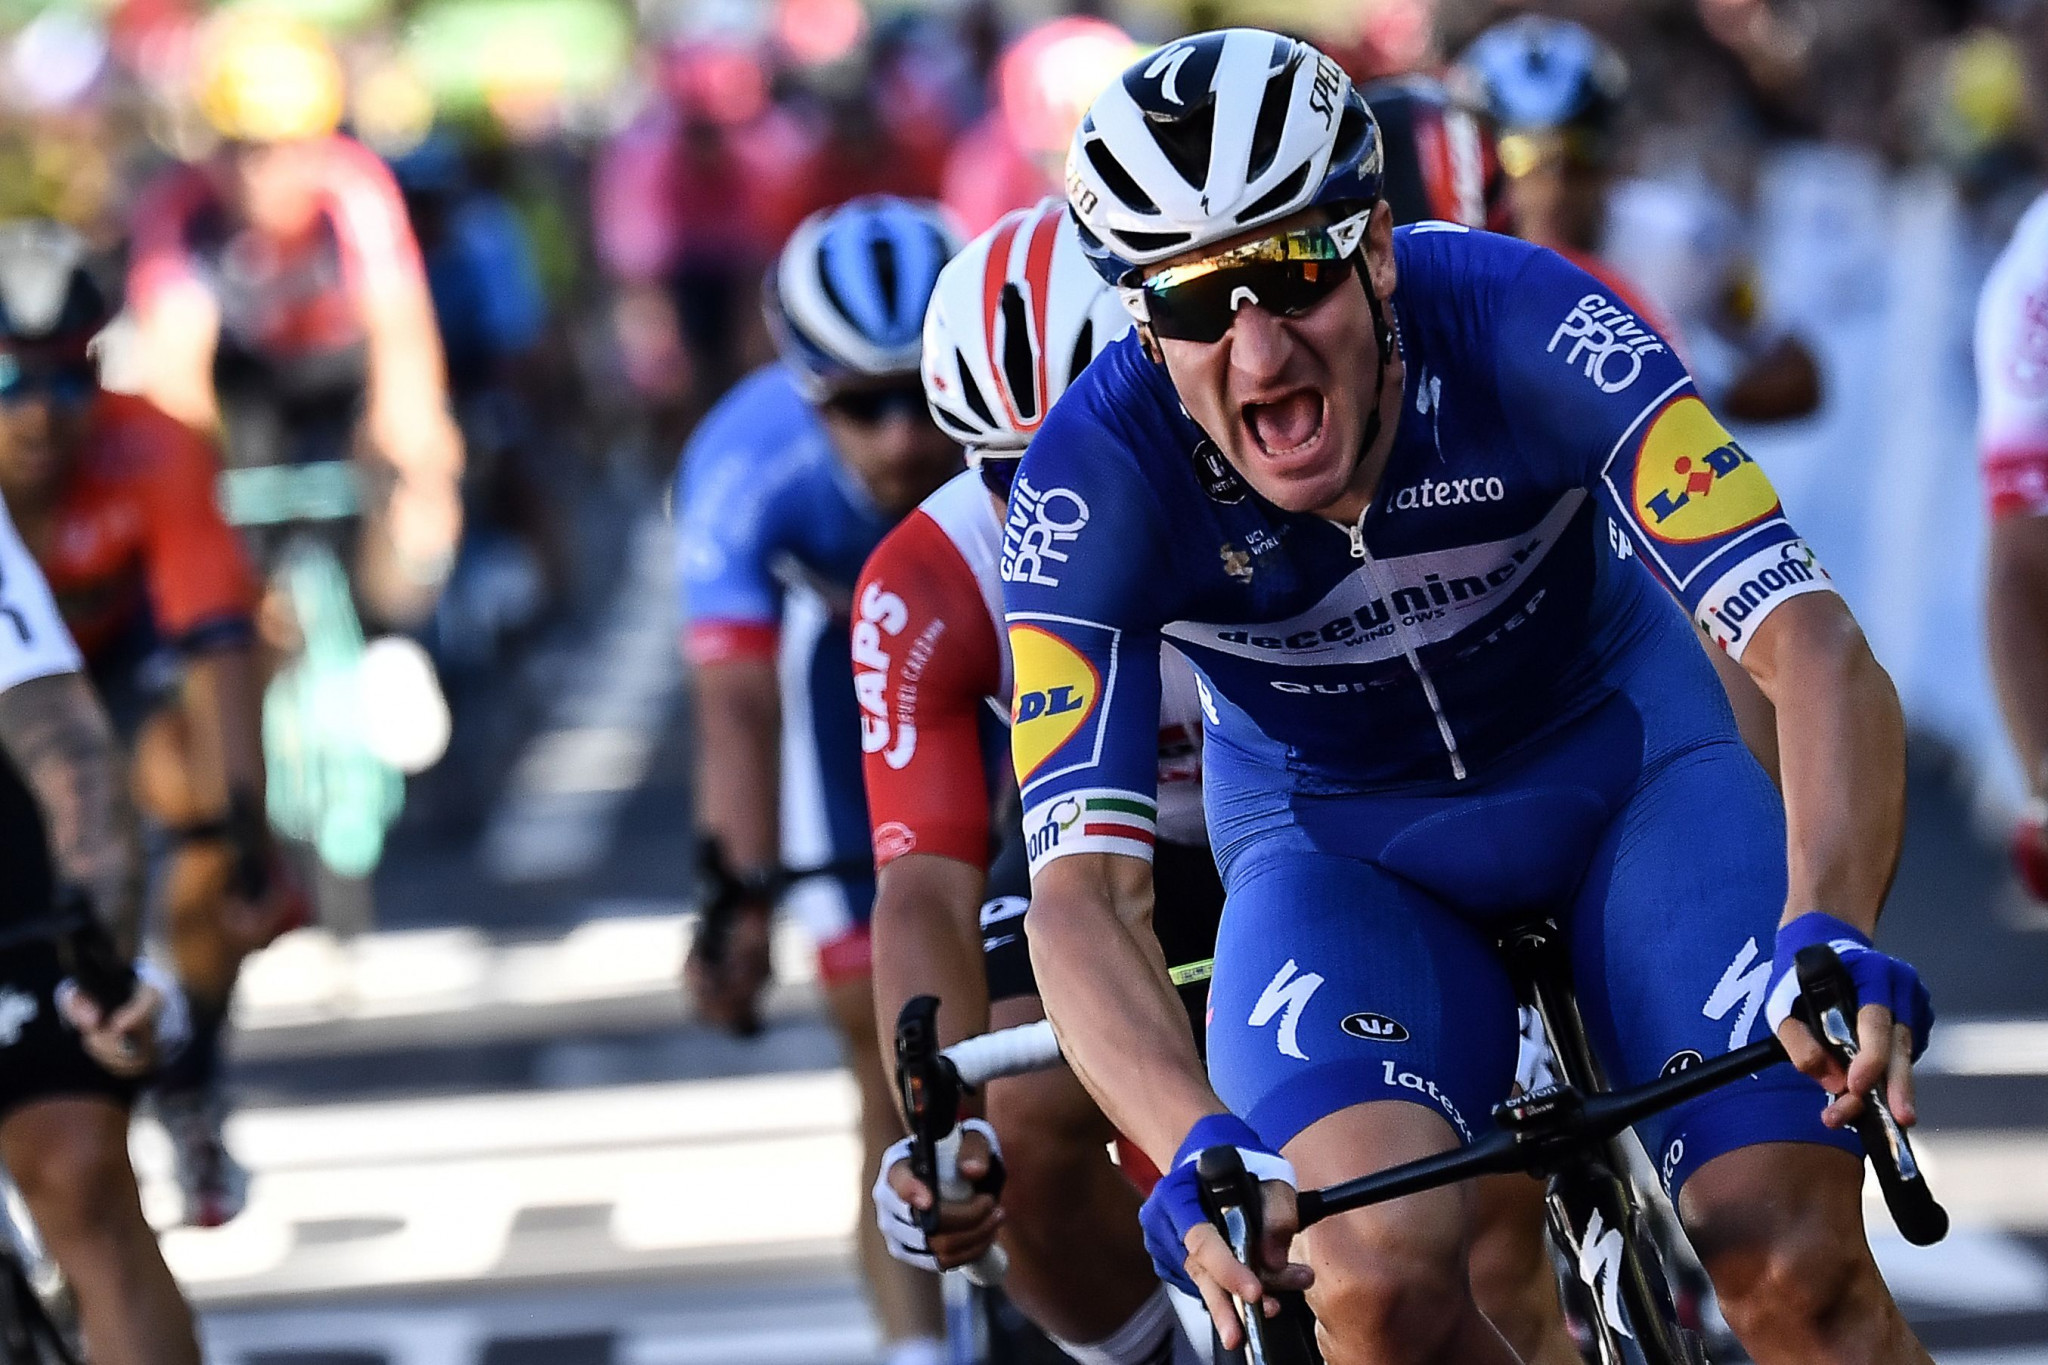 Italy’s Elia Viviani claimed his maiden Tour de France stage victory today ©Getty Images